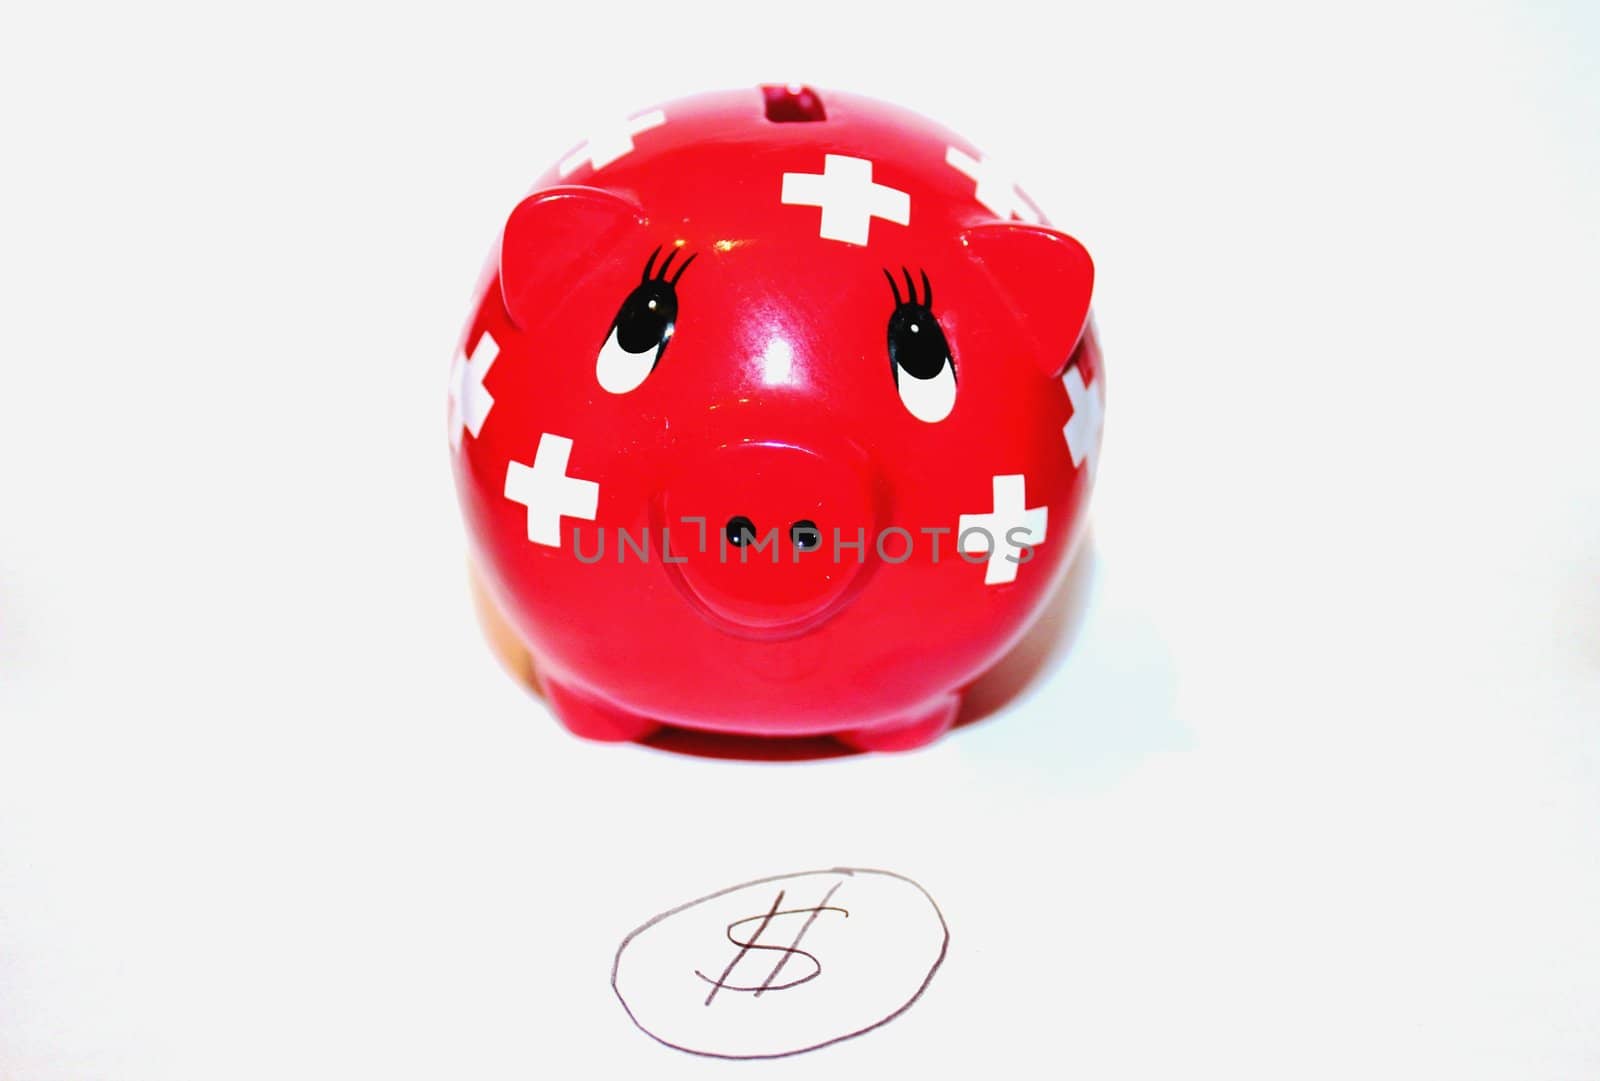  Red piggy bank isilated on white background